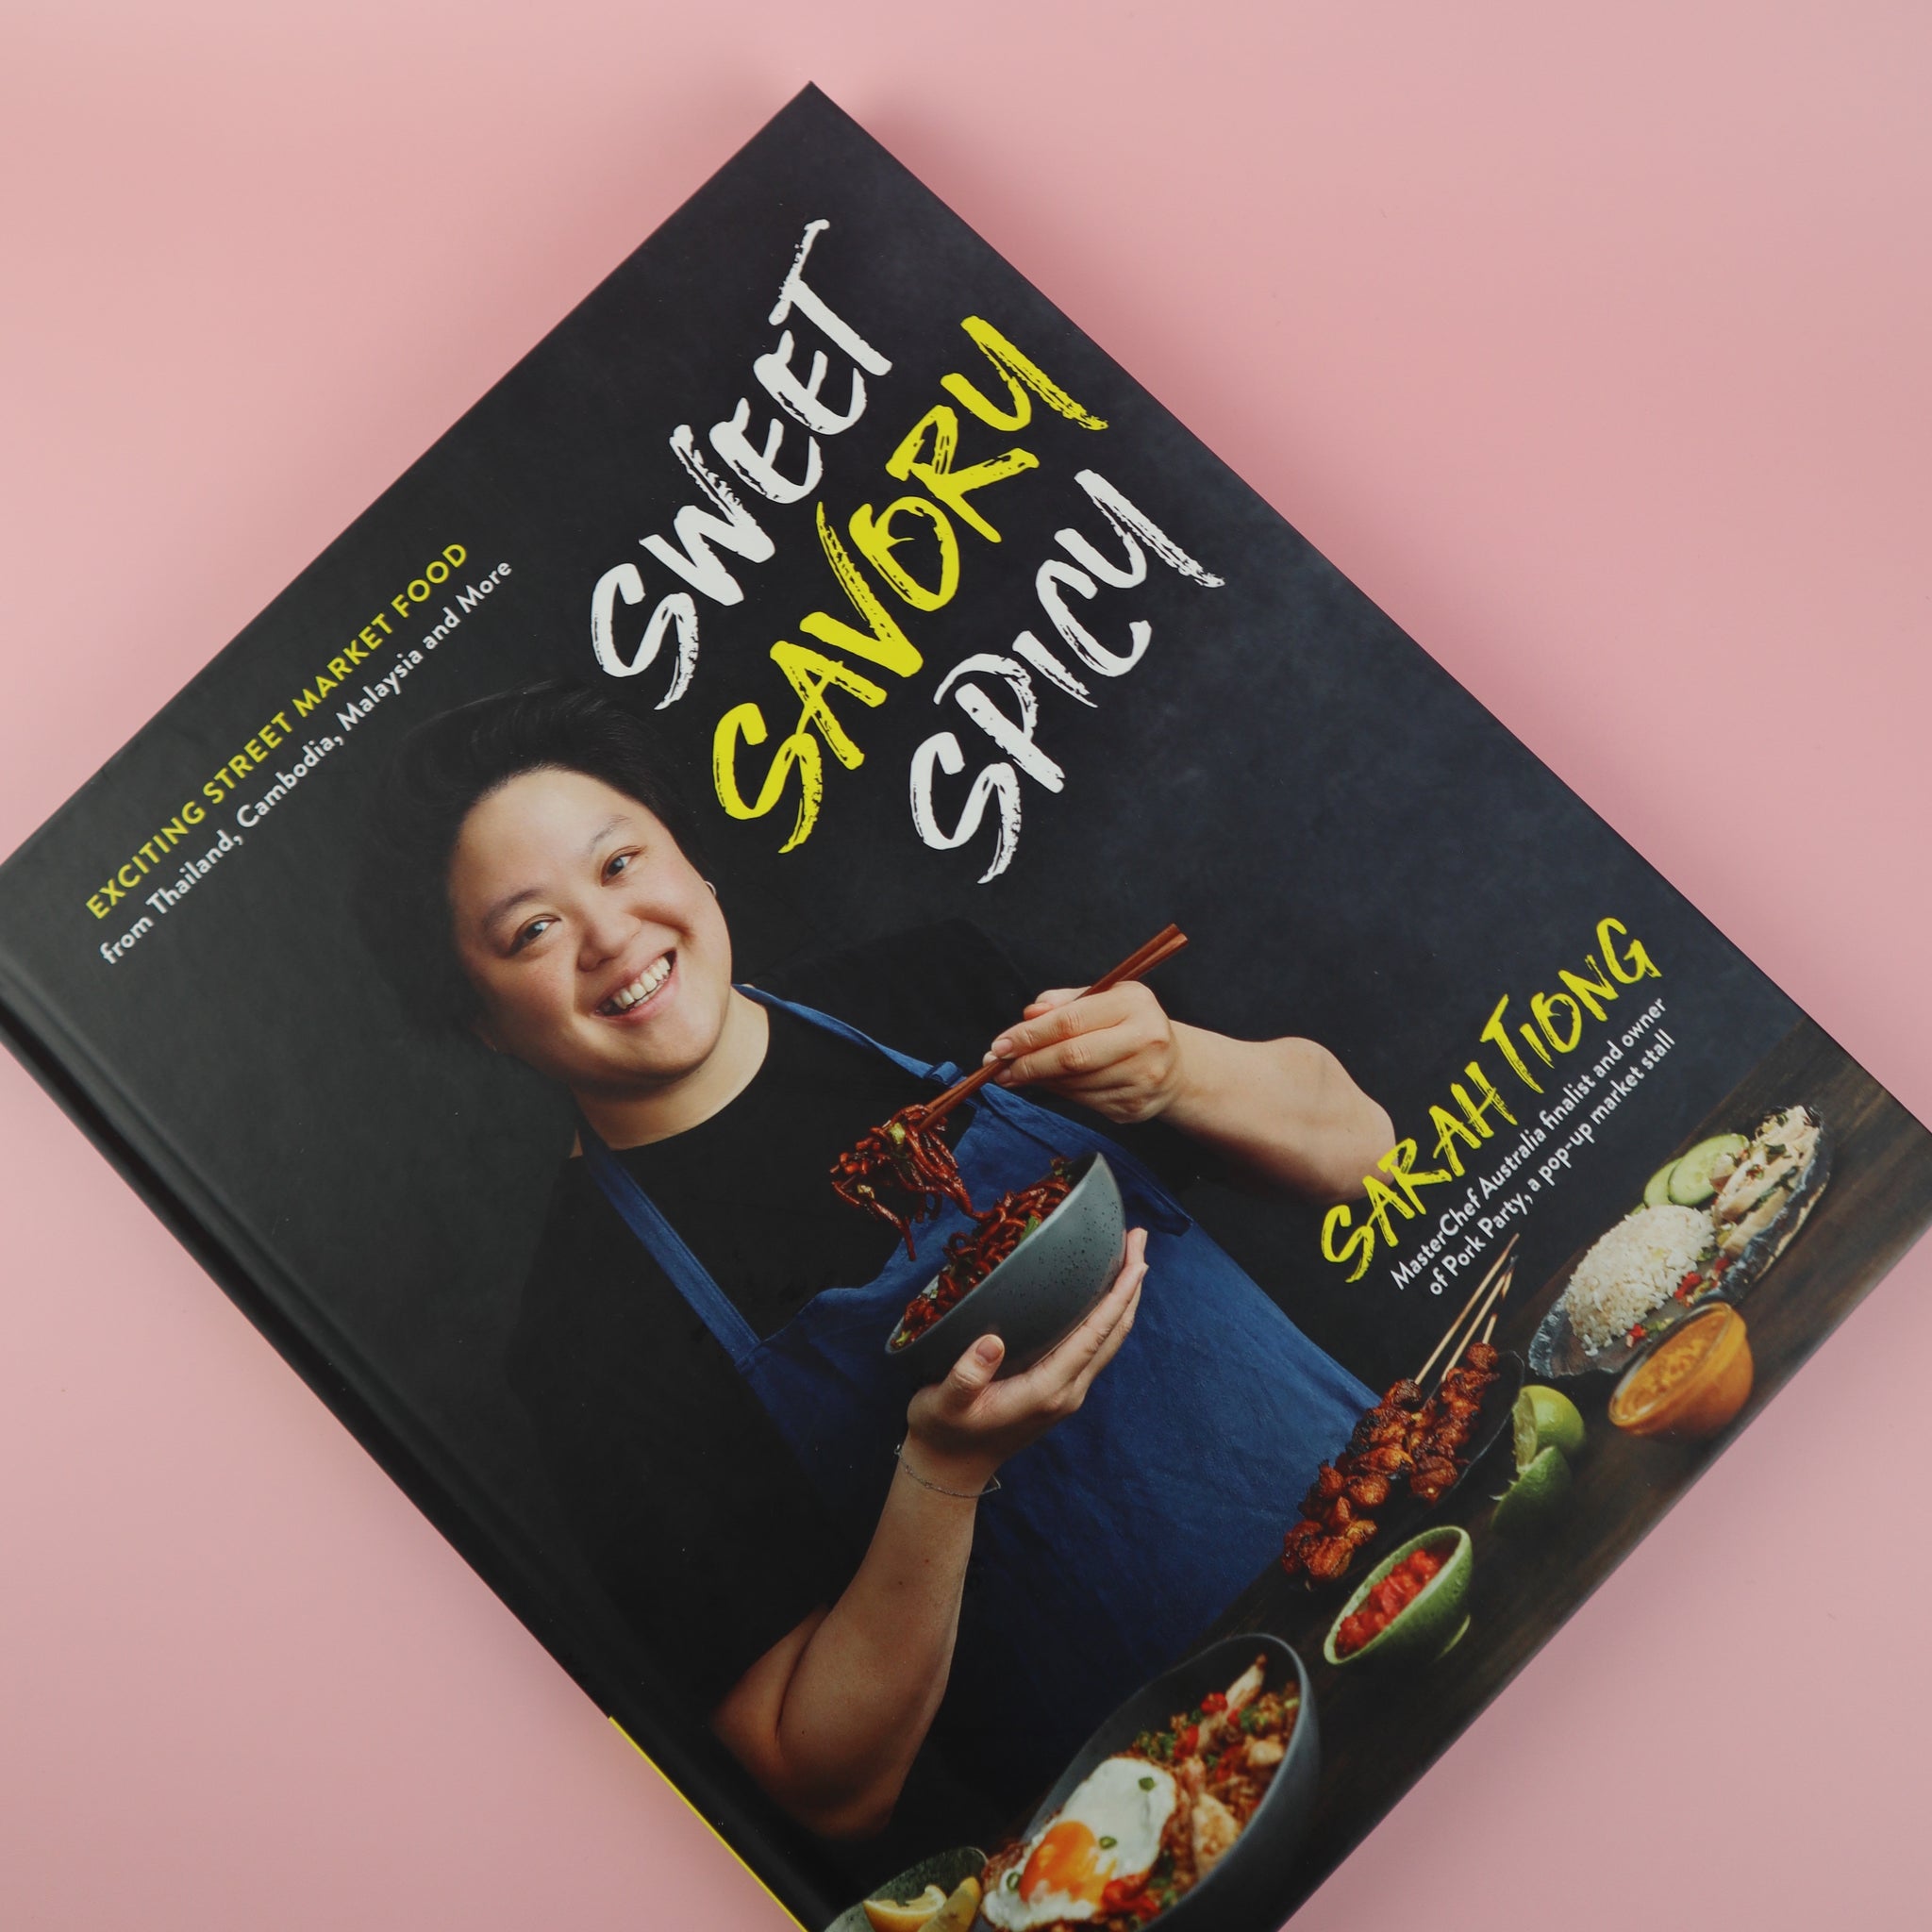 SARAH TIONG SOUTHEAST ASIA SWEET SAVORY SPICY COOKBOOK